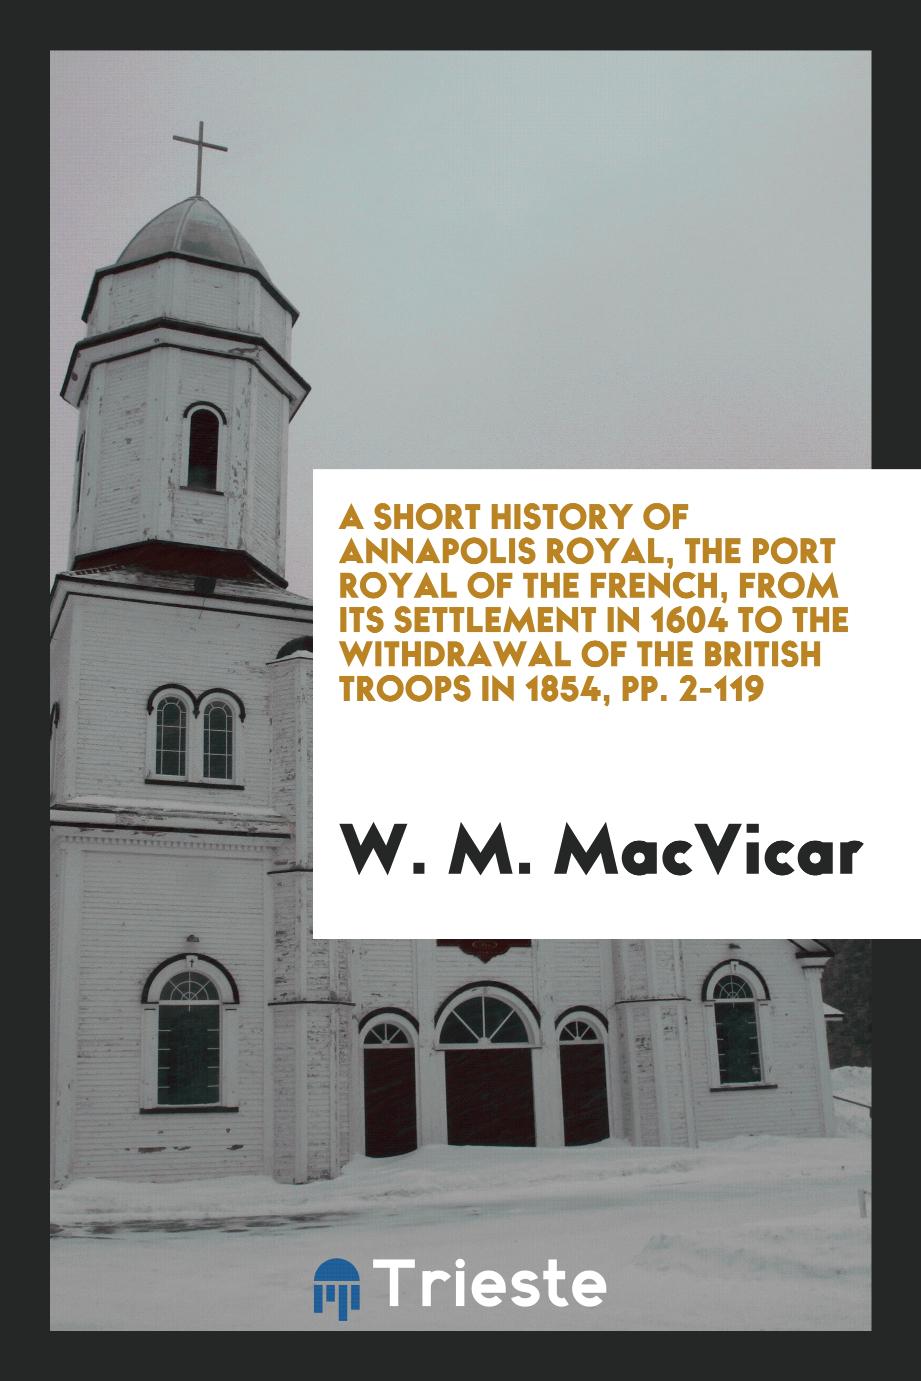 A Short History of Annapolis Royal, the Port Royal of the French, from Its Settlement in 1604 to the Withdrawal of the British Troops in 1854, pp. 2-119